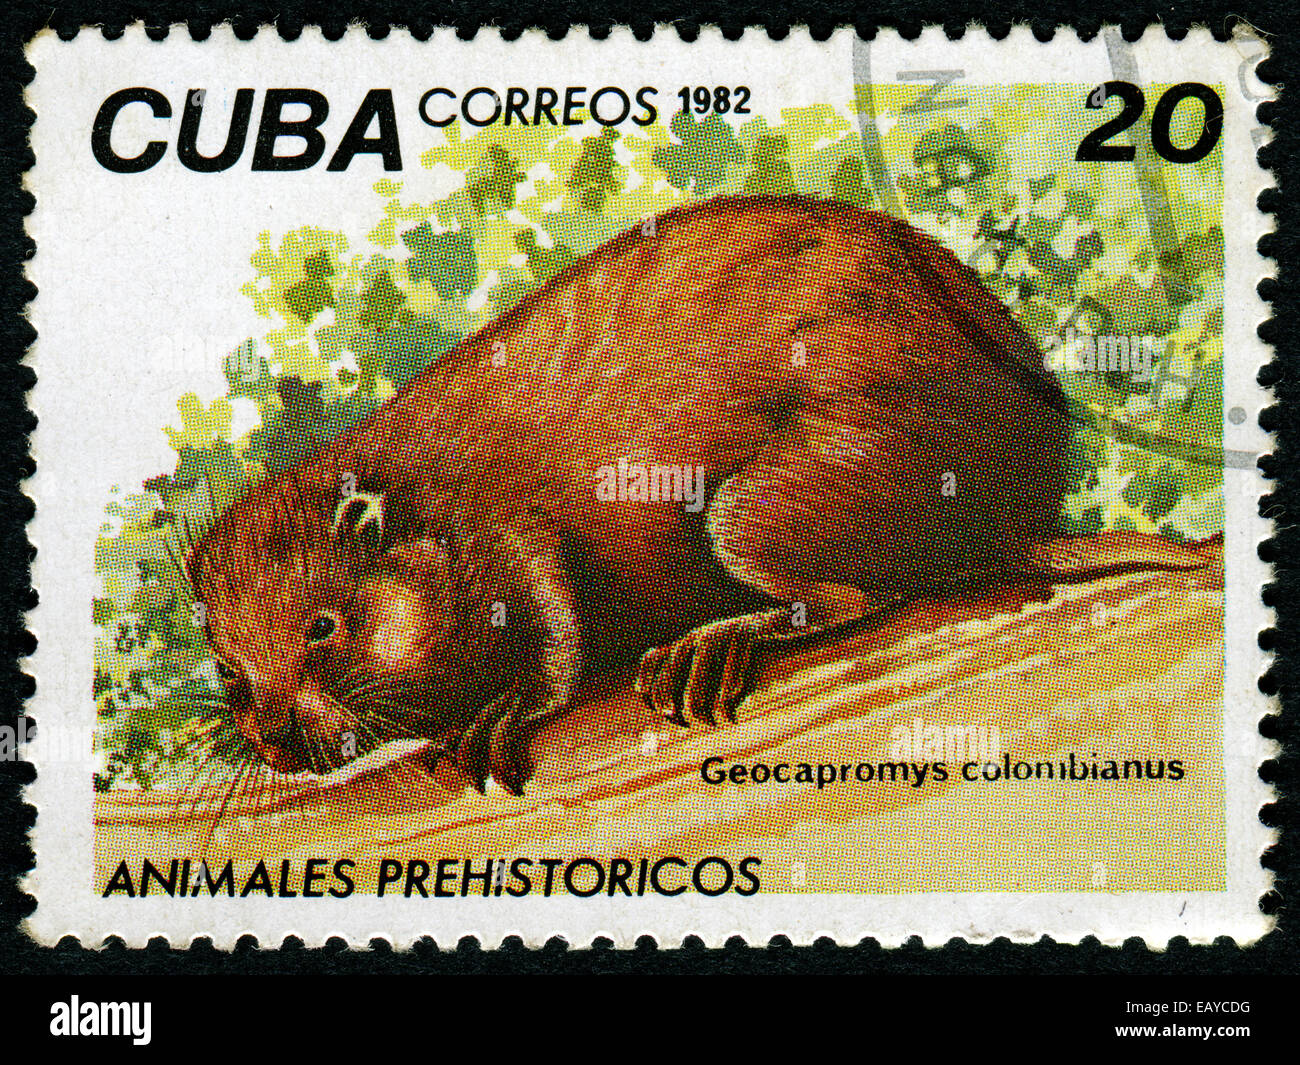 CUBA - CIRCA 1982: A Stamp printed in CUBA shows Geocapromys colombianus, circa 1982 Stock Photo